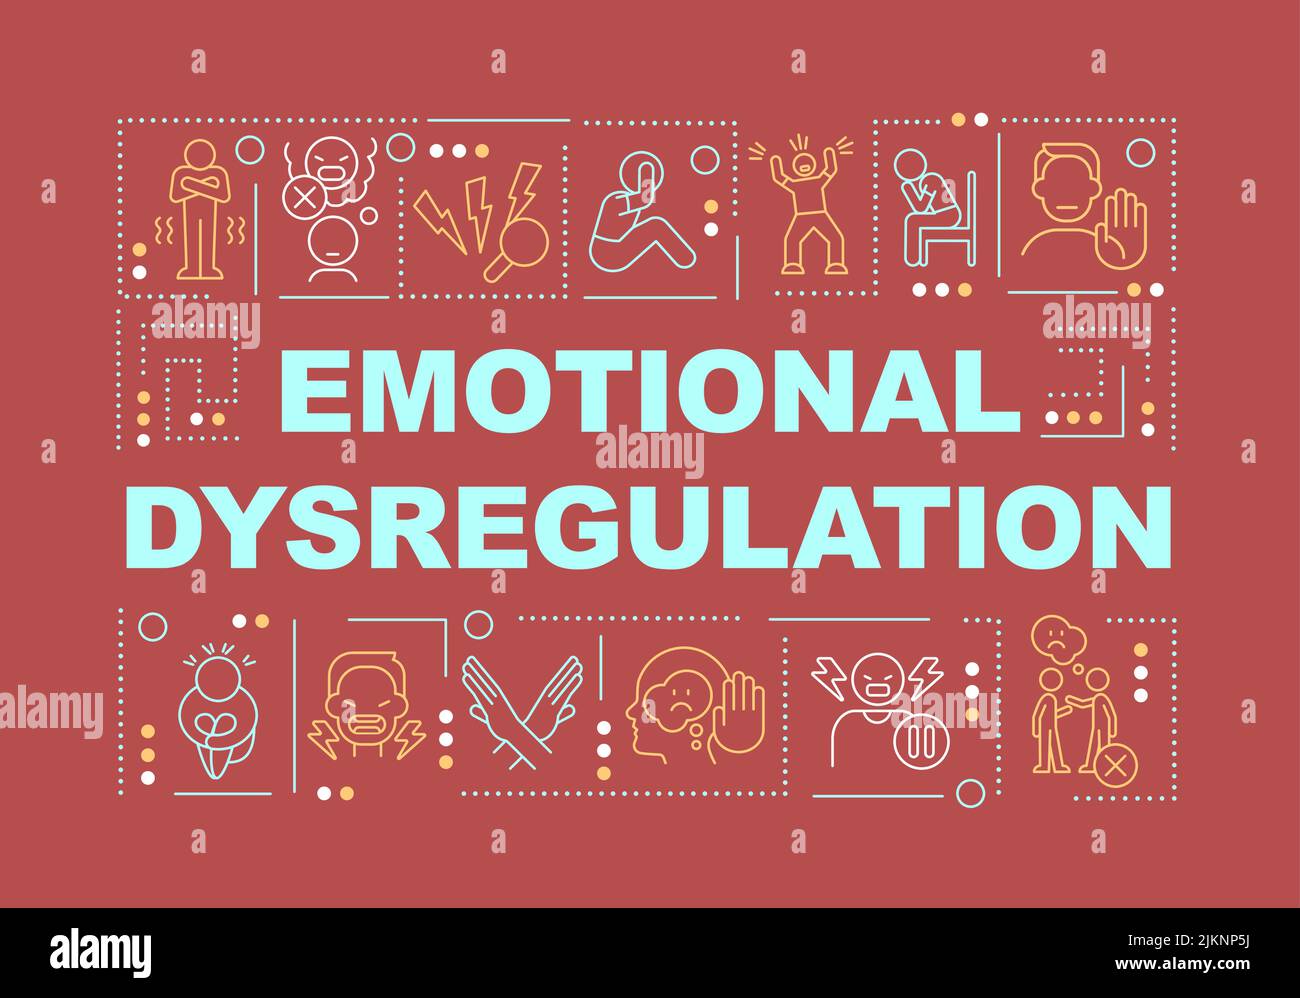 Emotional dysregulation word concepts red banner Stock Vector